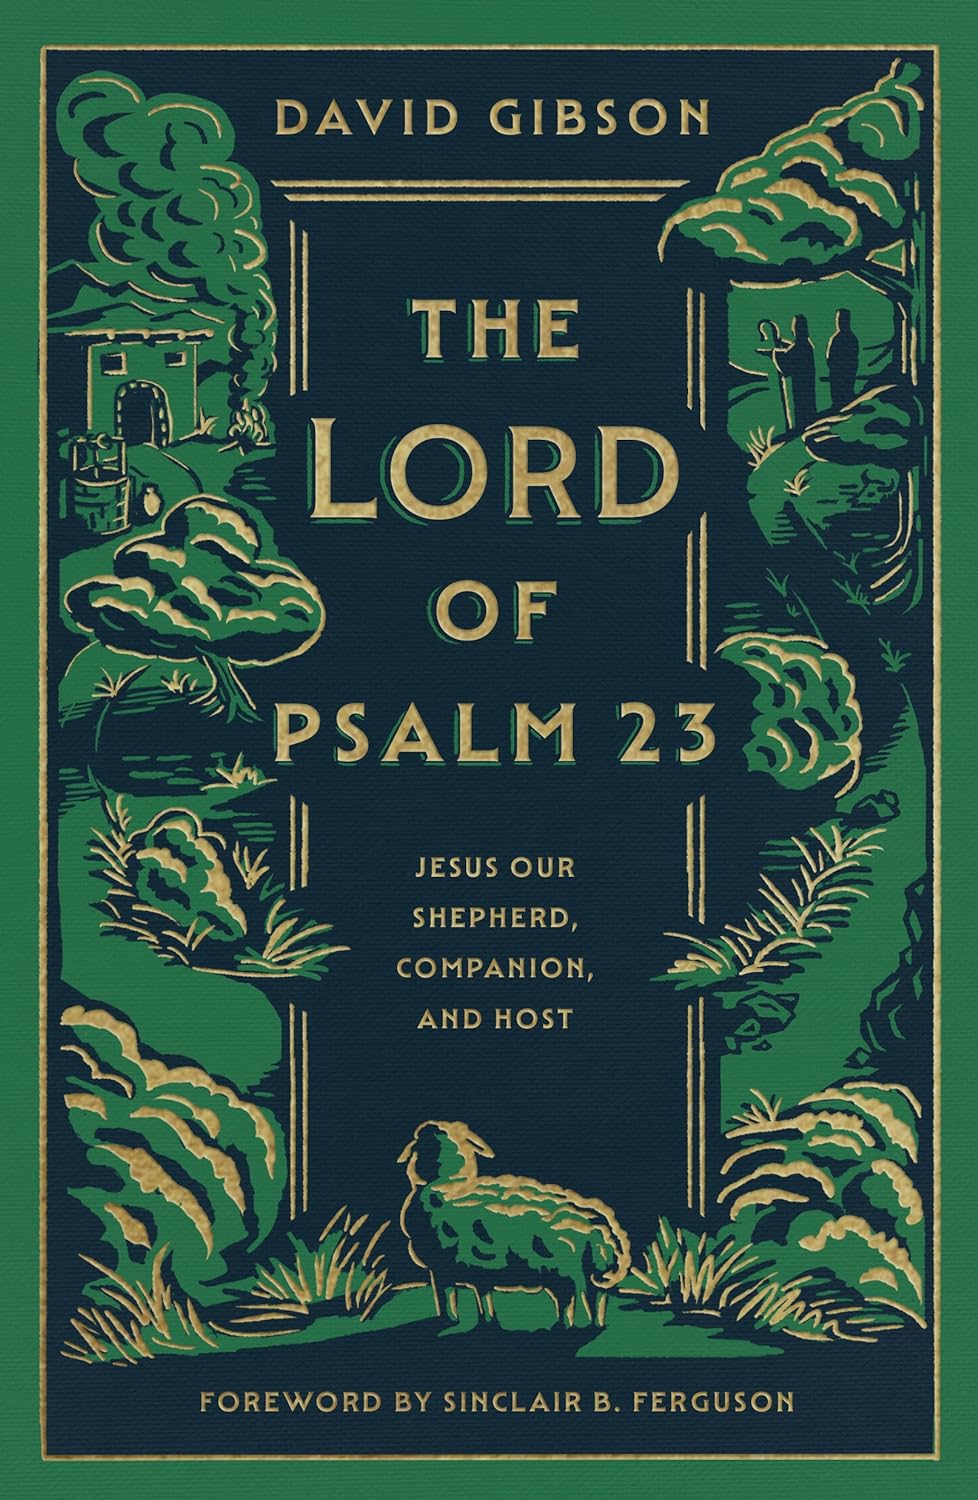 The　23:　Psalm　Our　Jesus　Bookstore　Shepherd,　Lord　and　Host　–　Westminster　of　Companion,